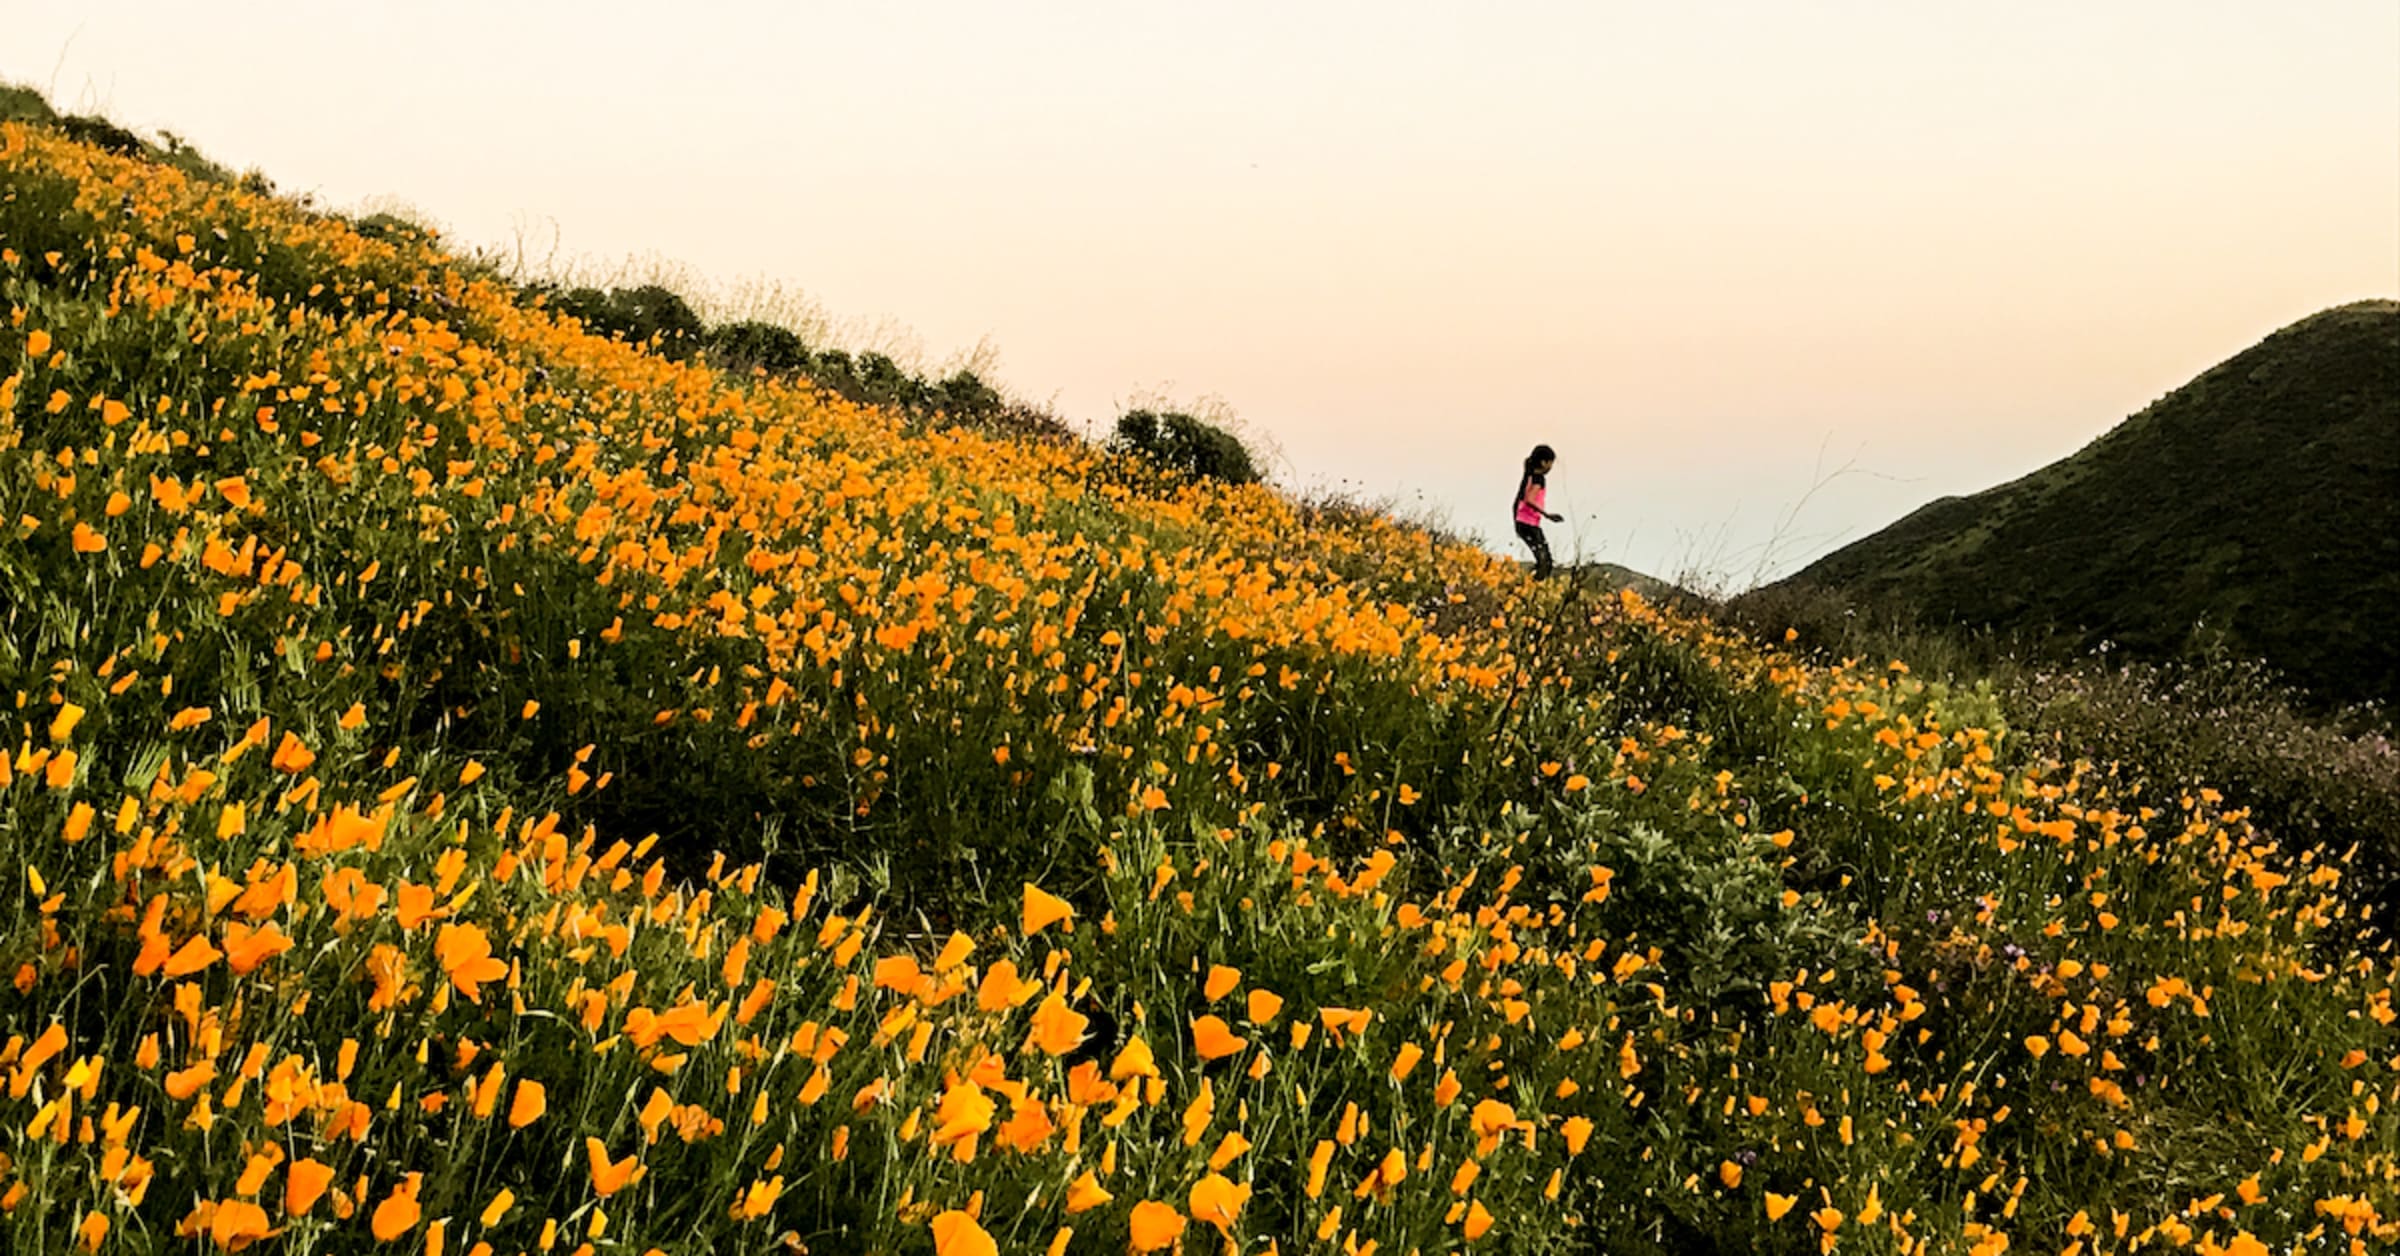 The Best Photos from the 2017 Superbloom